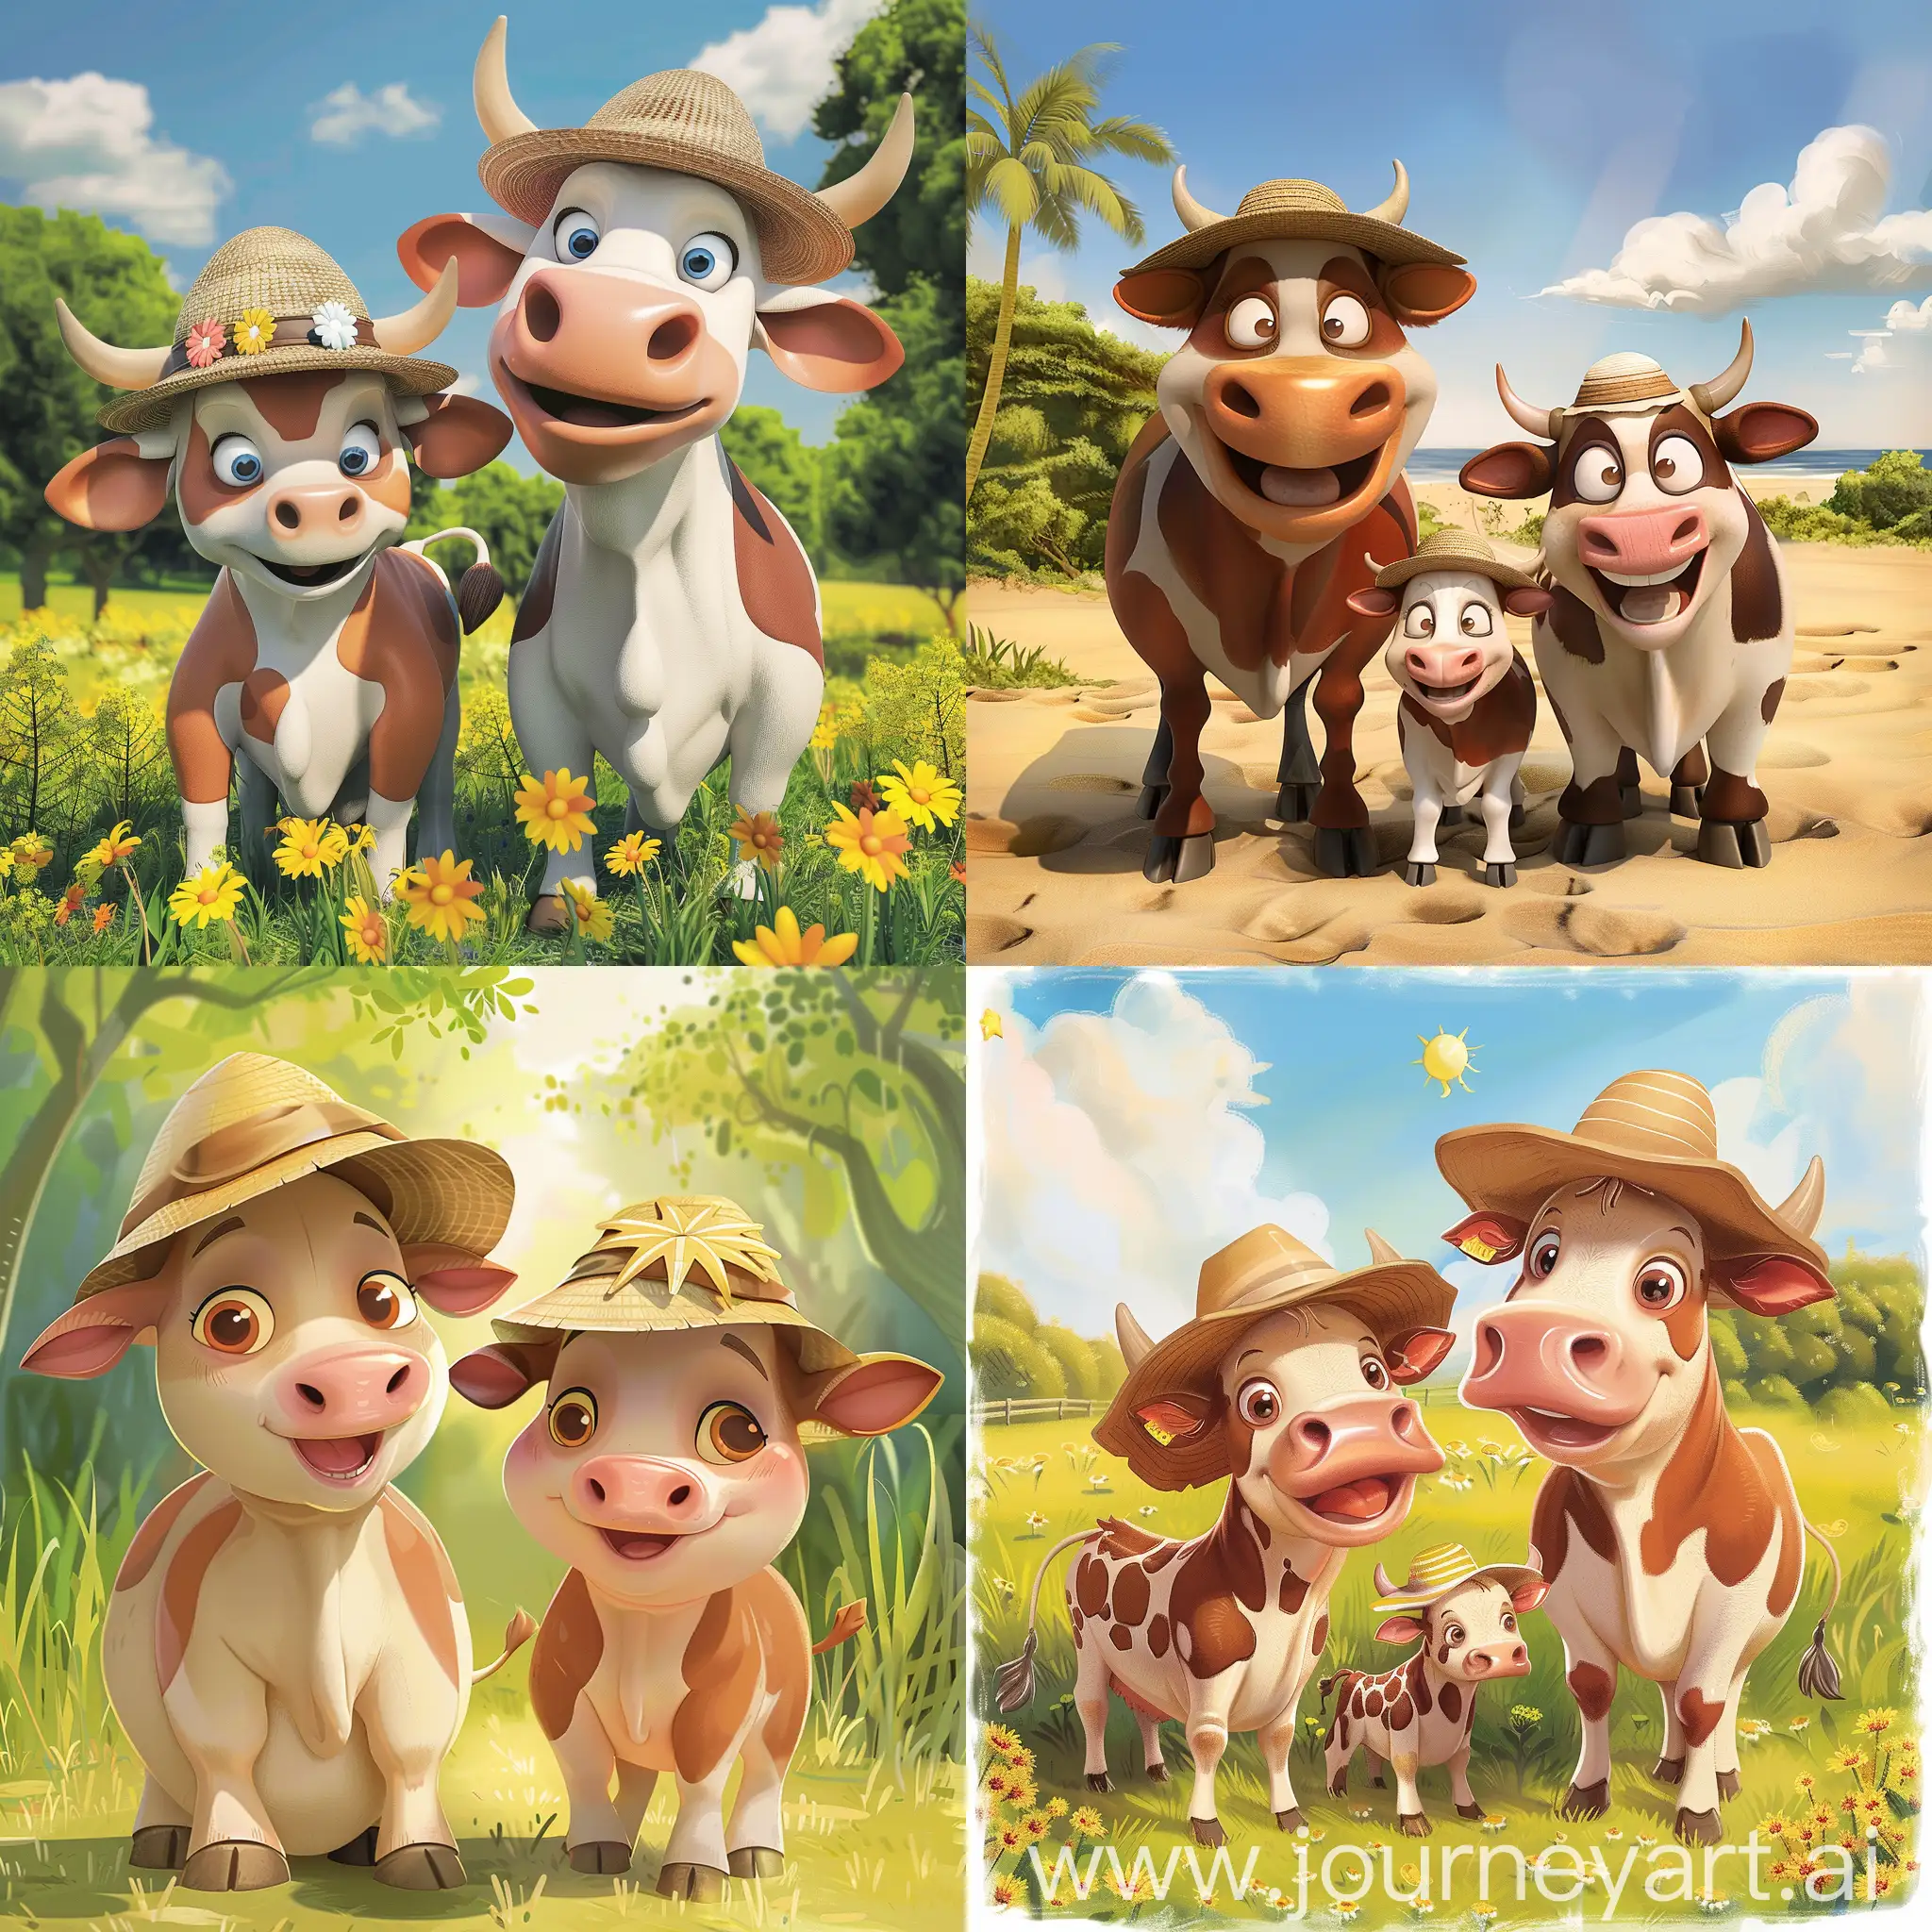 Amusing-Cow-Family-Wearing-Sunhats-in-Animated-Sublime-Setting